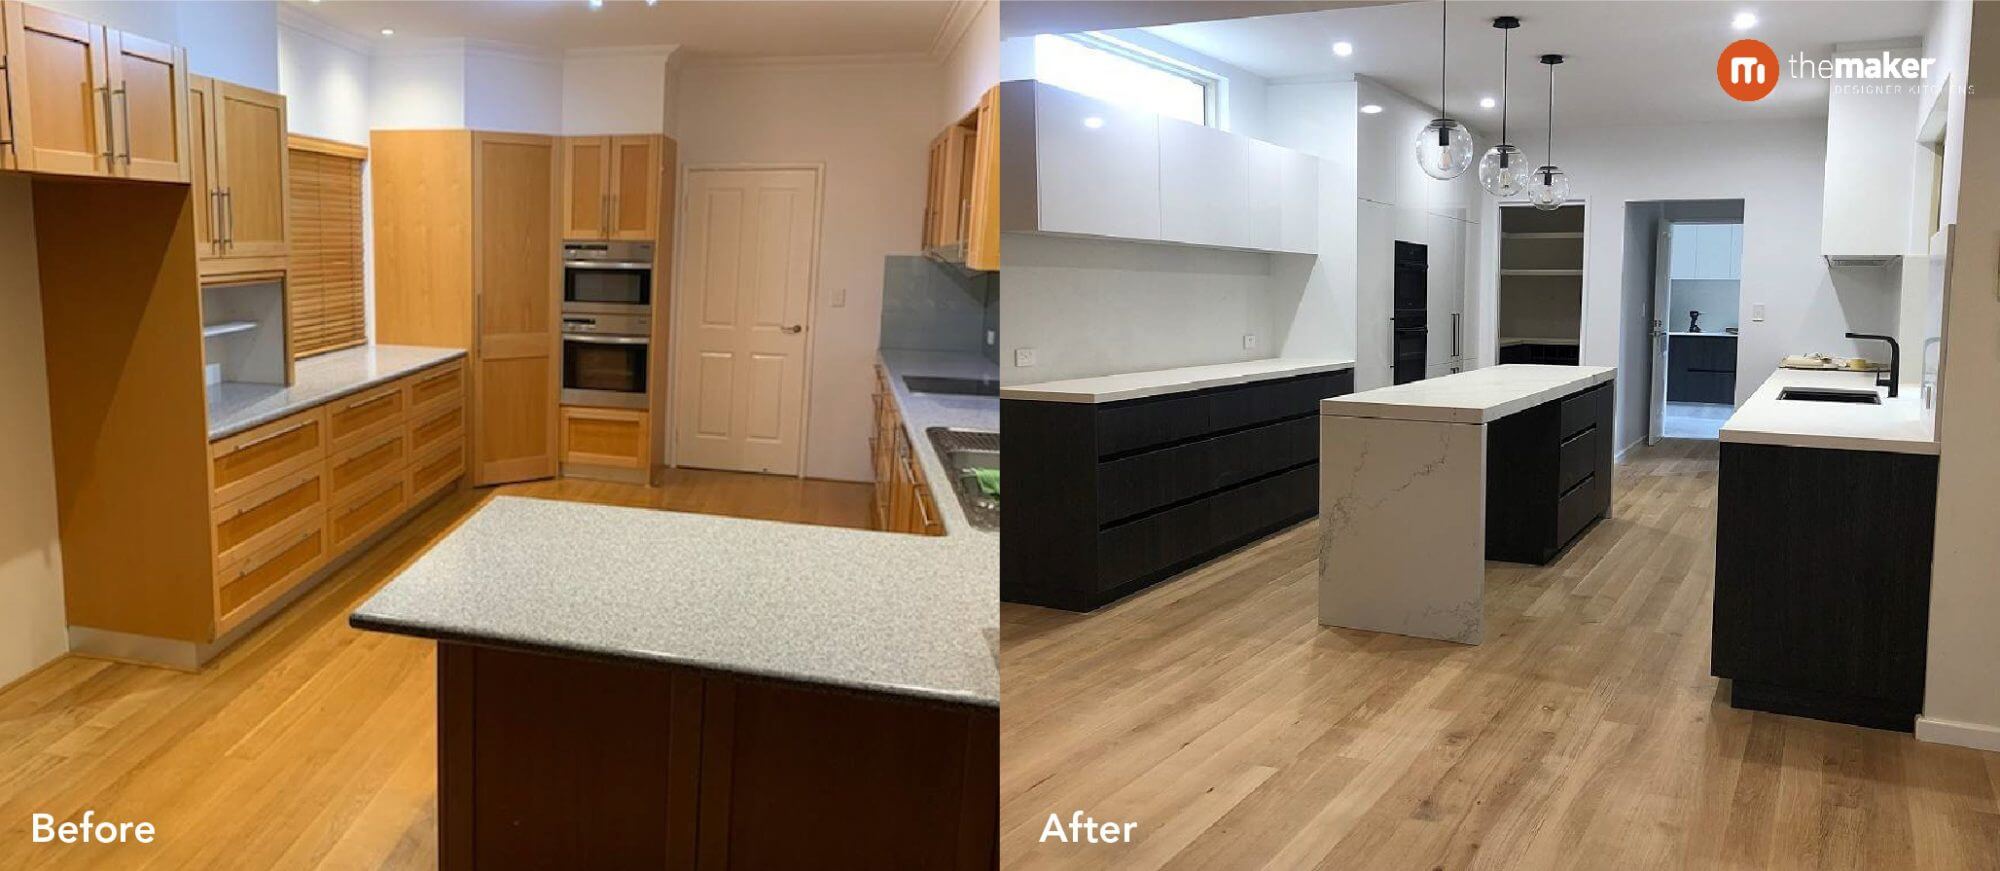 Illuka-the-ultimate-kitchen-renovation-before-and-after